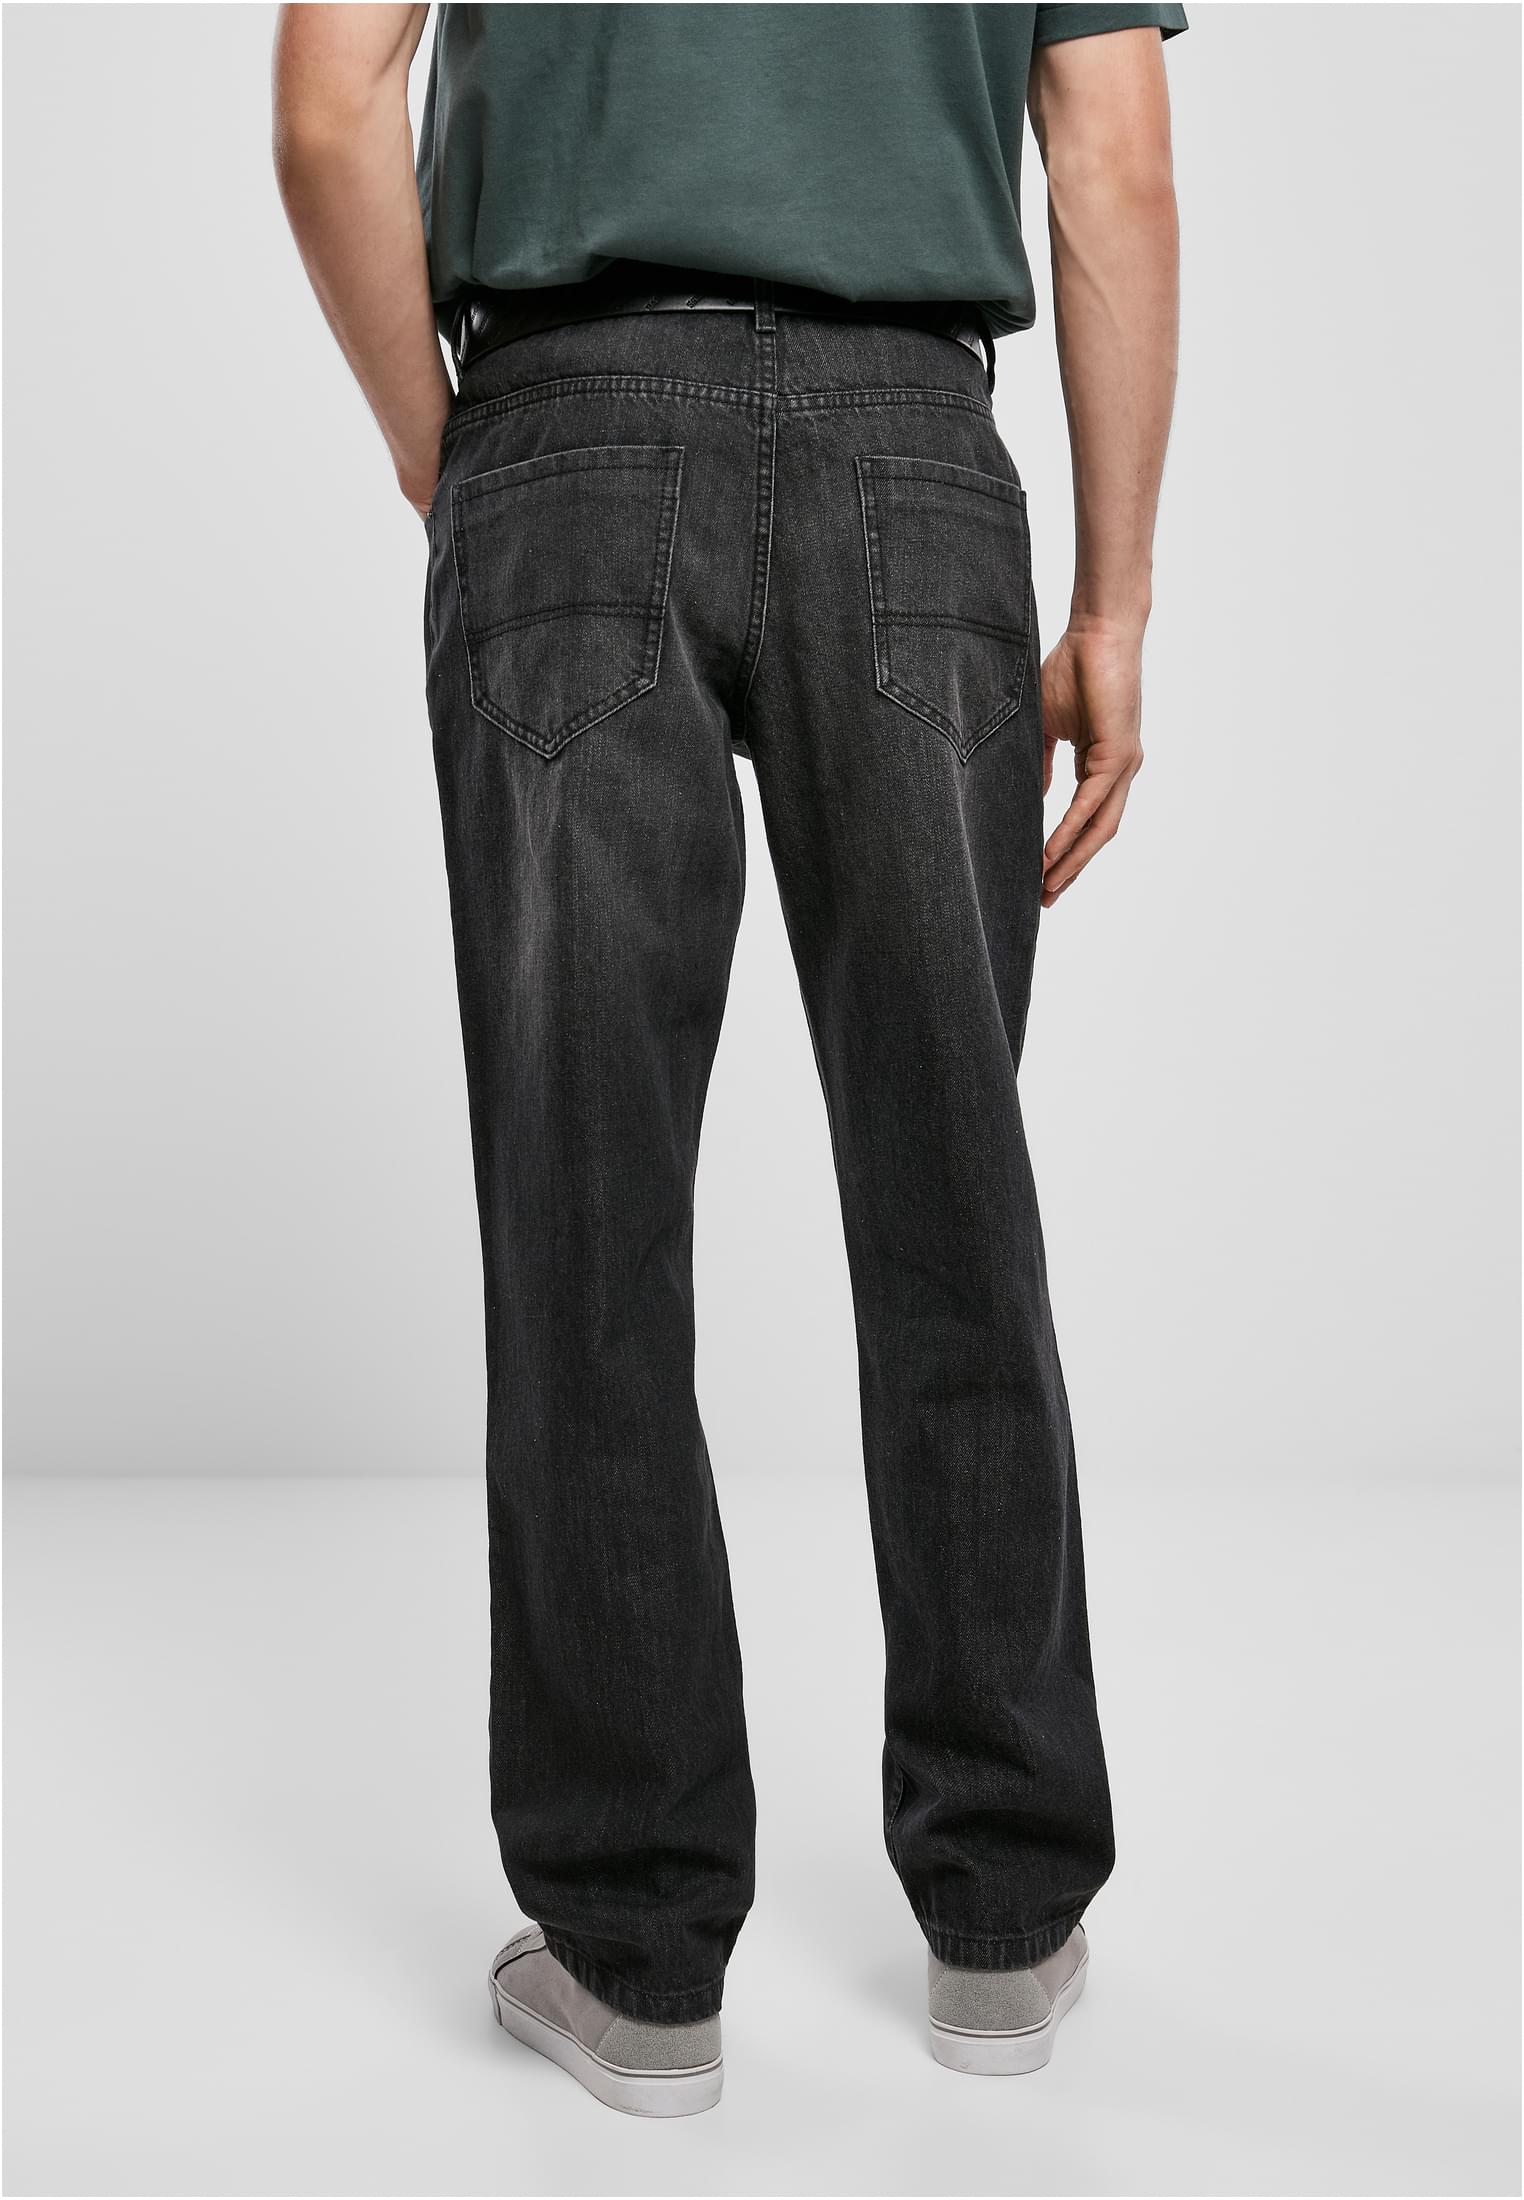 Hosen Loose Fit Jeans in Farbe real black washed